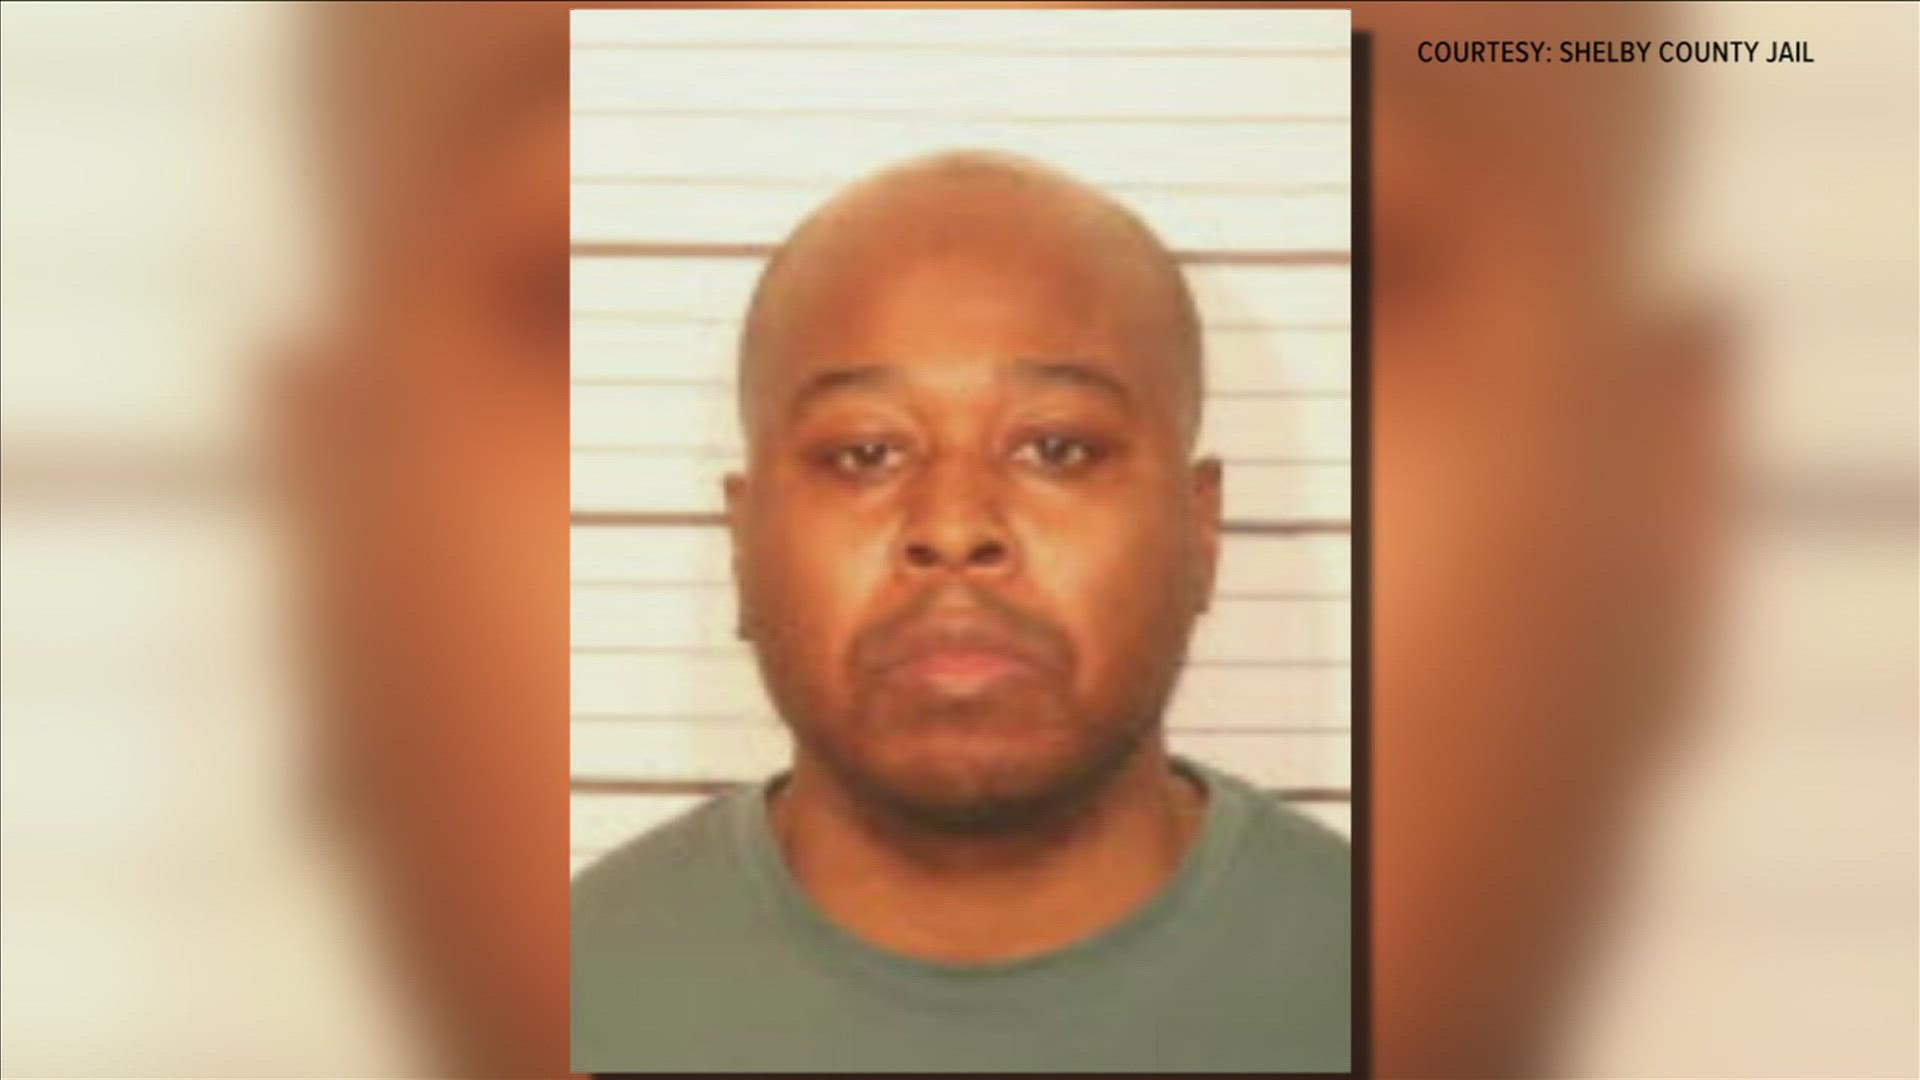 Almost 5 months after firing a gun in a Wendy's parking lot that struck an employee, 35-year-old Joshua Moore is being held in the Shelby County Jail without bond.